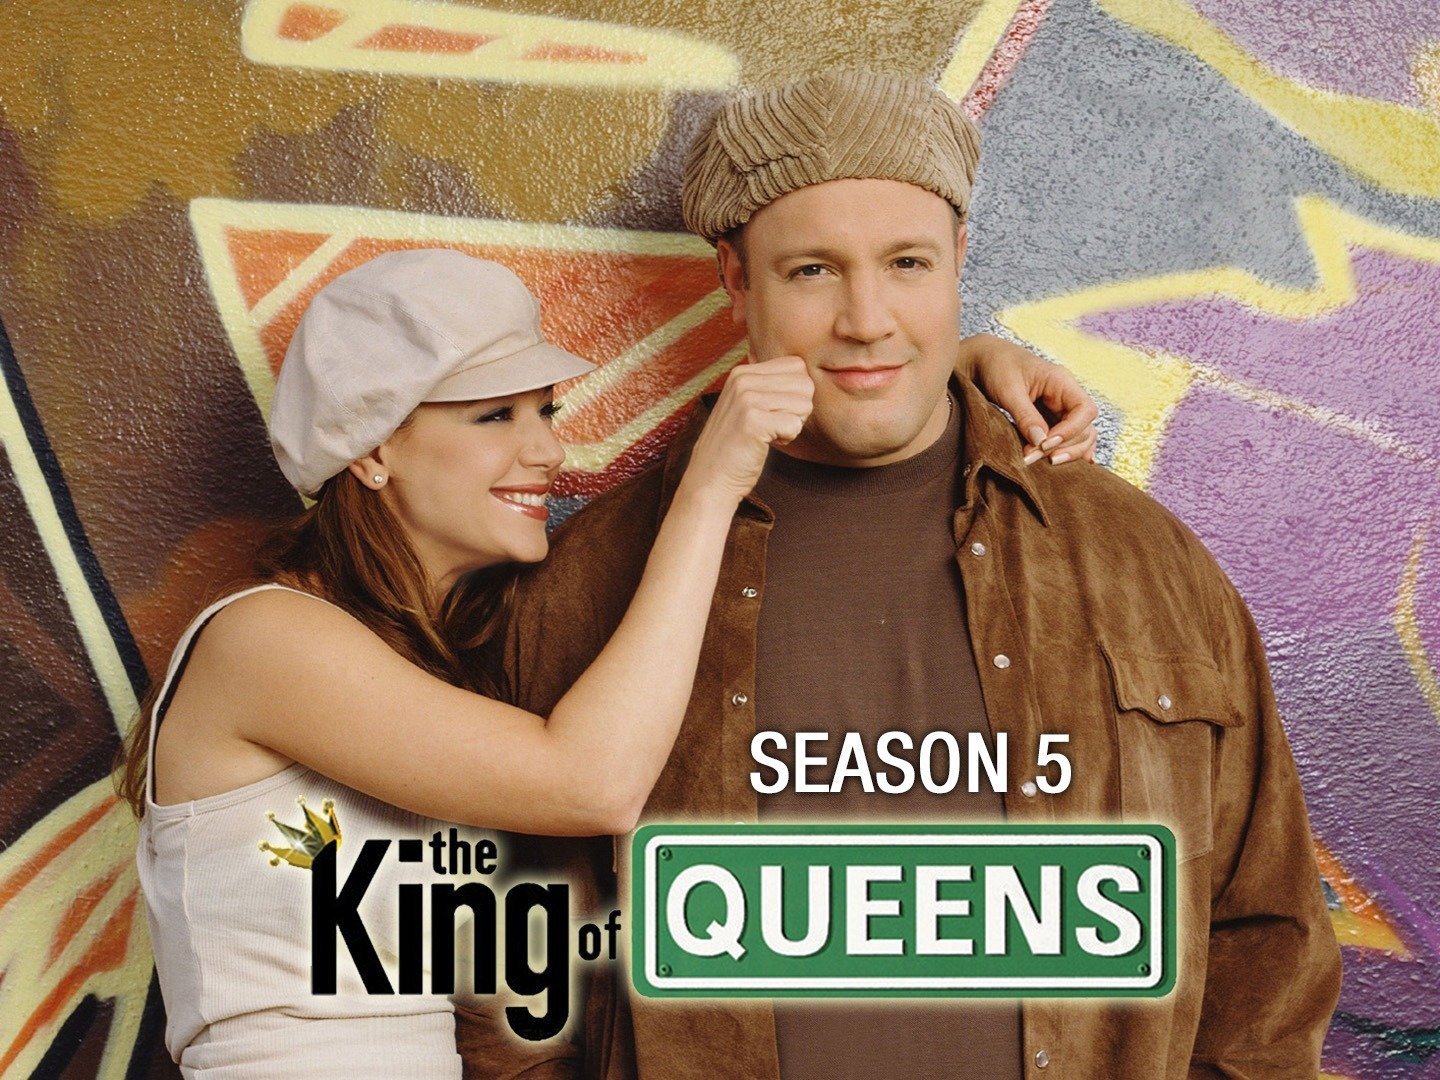 the king of queens seasons